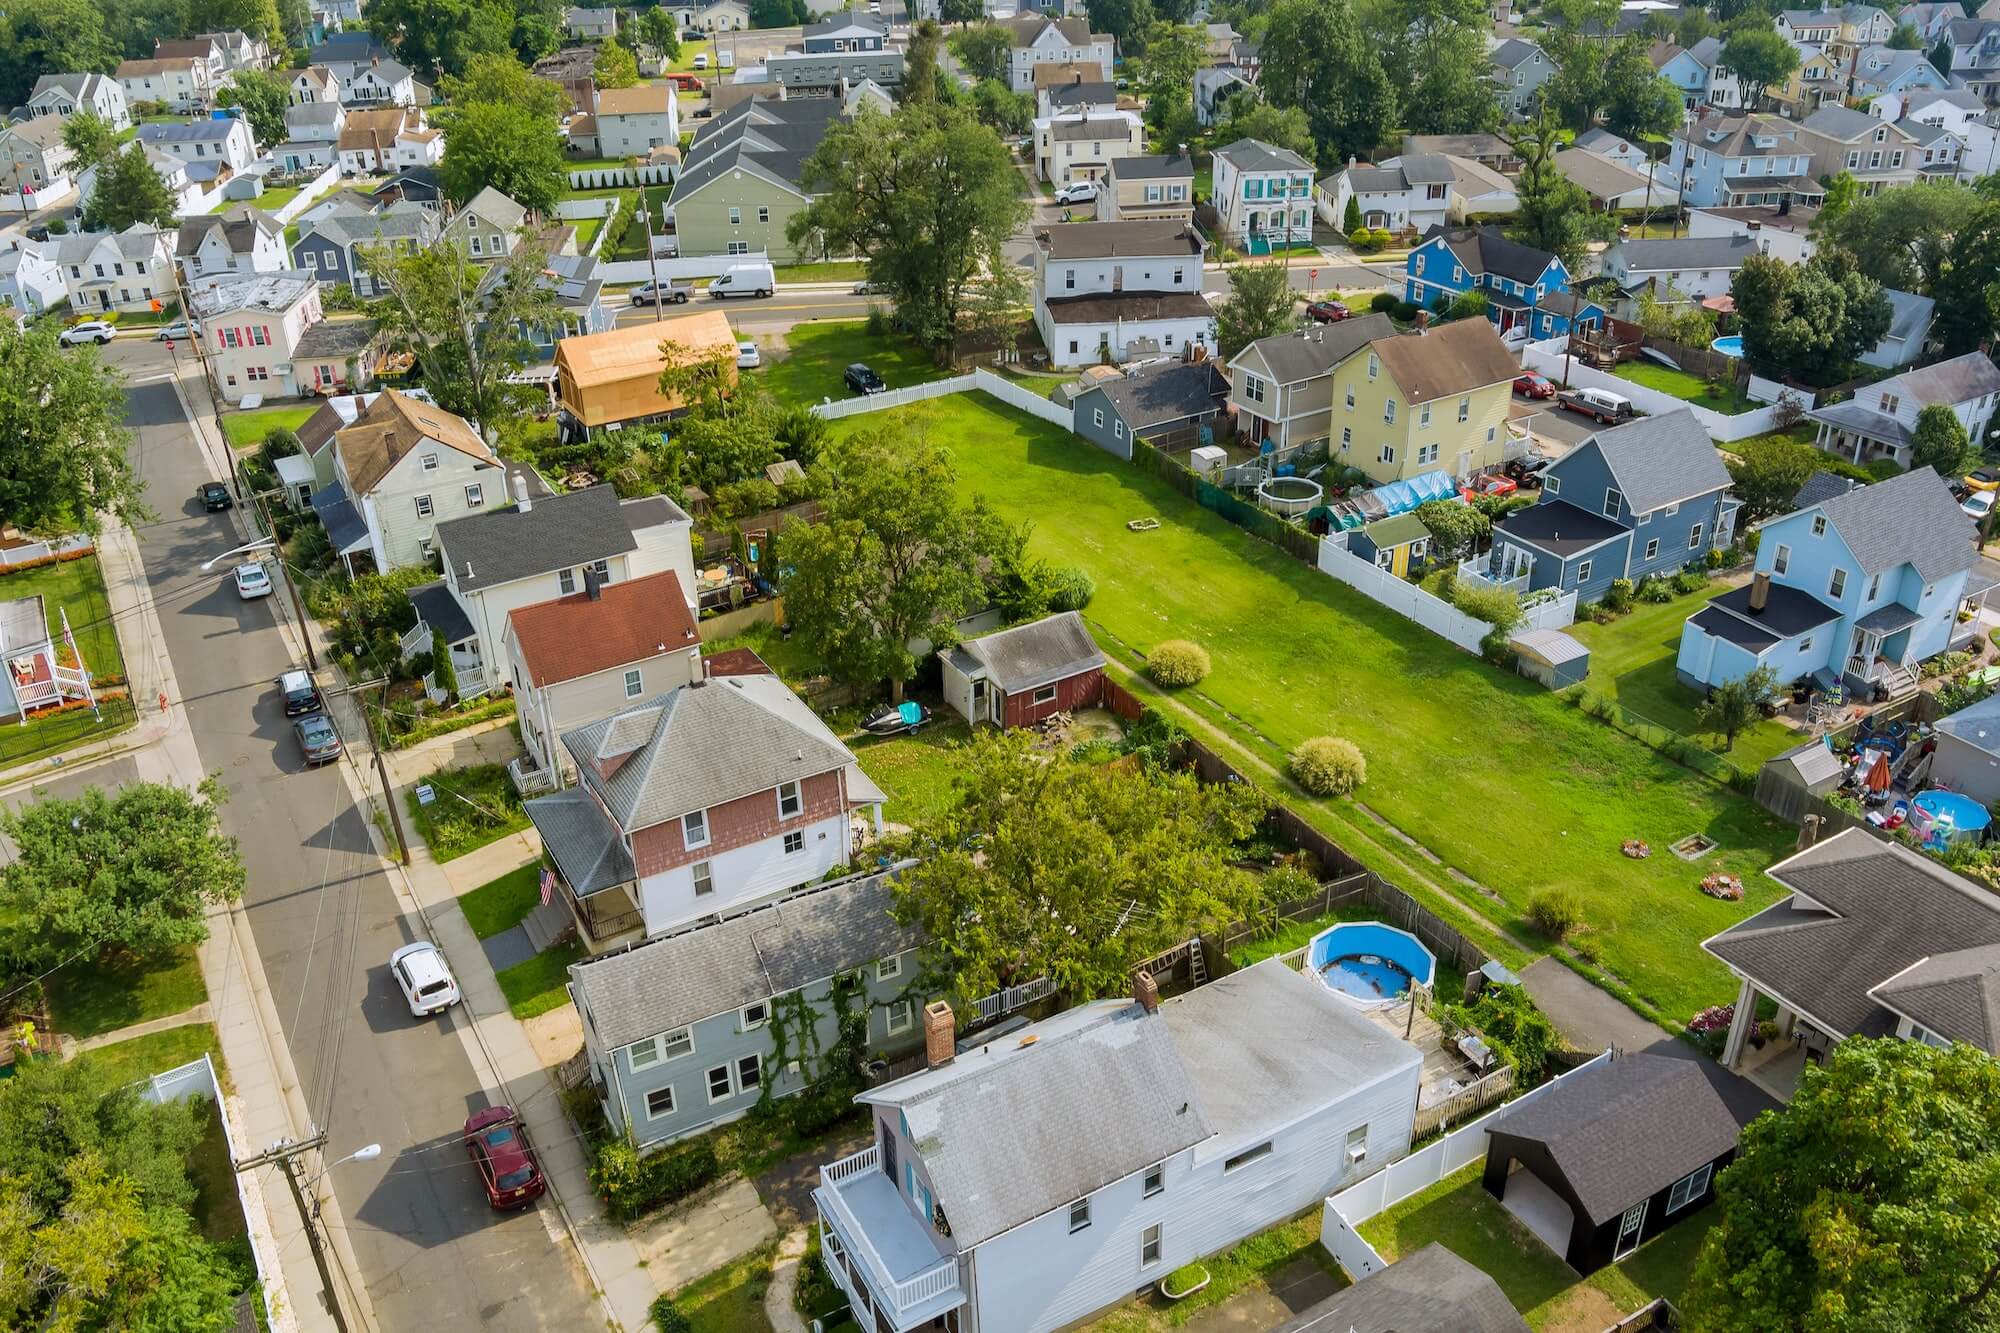 Aerial view of small streets residential area a small town in Sayreville New Jersey